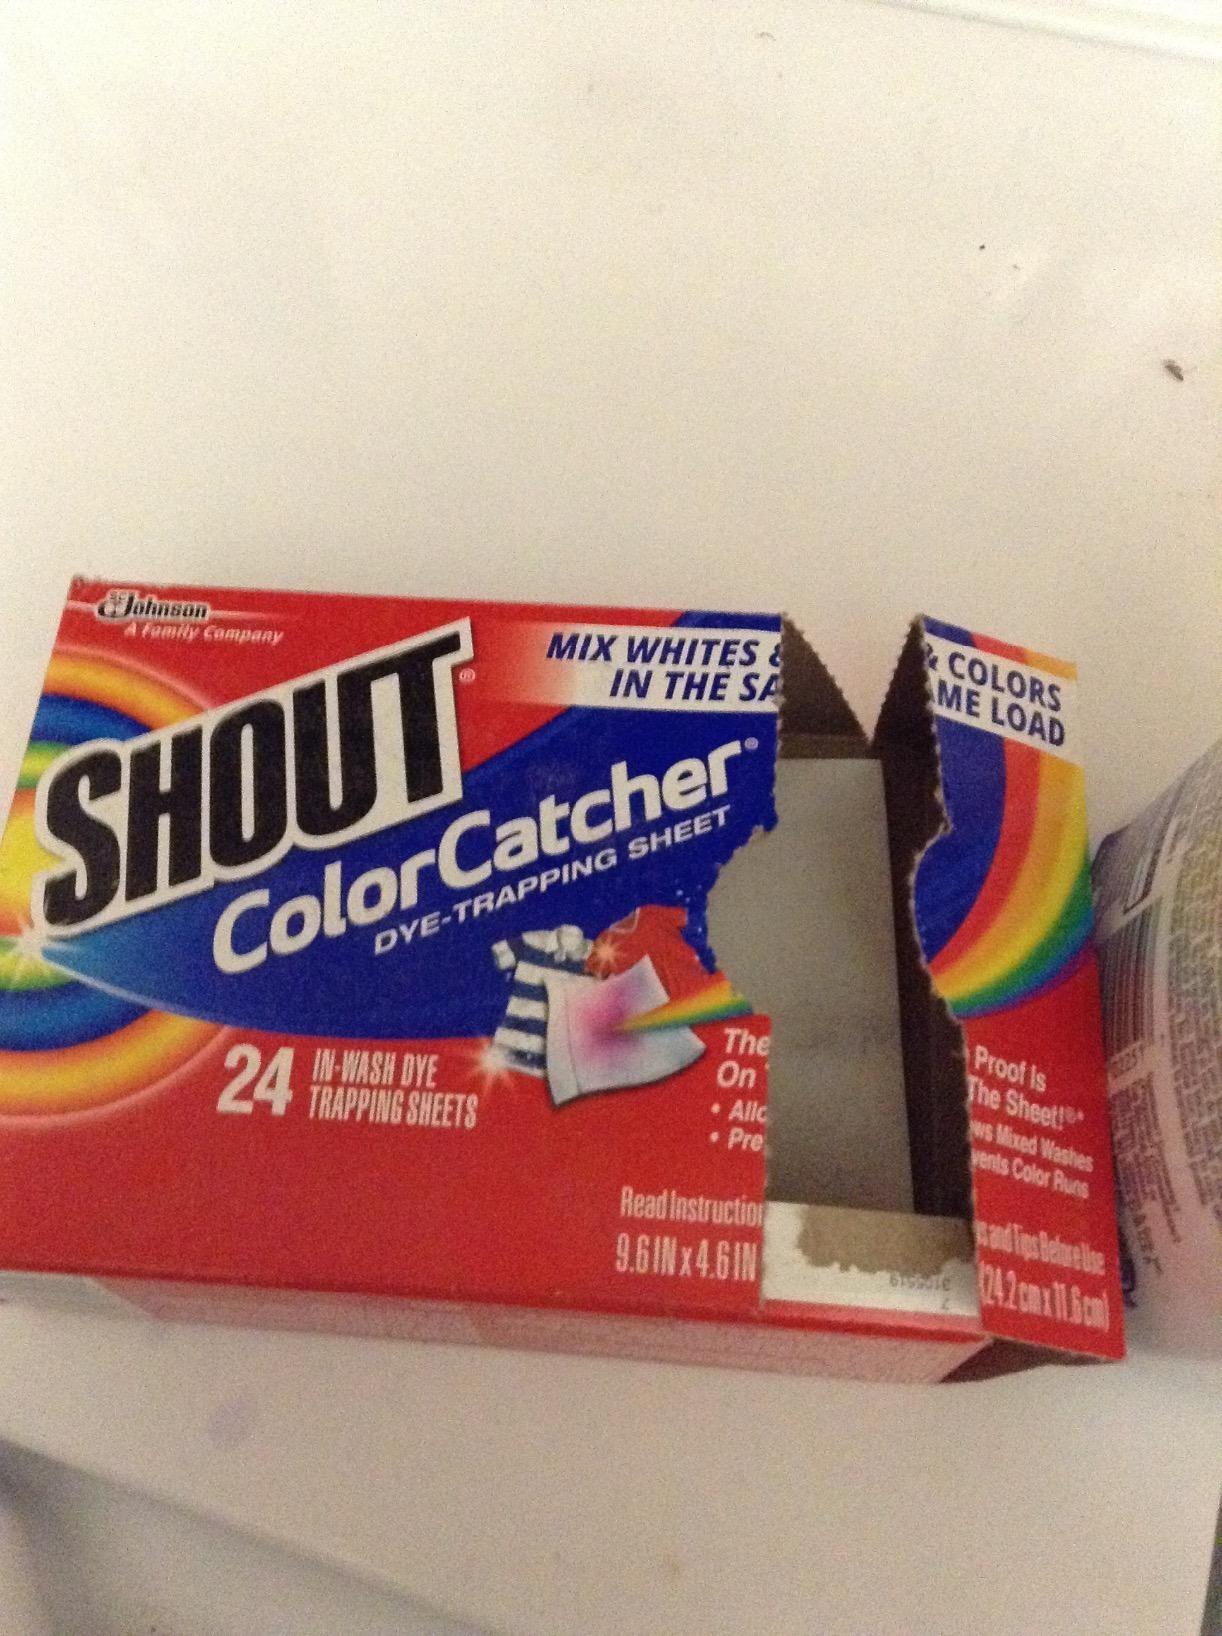 reviewer image of open color catcher sheet box